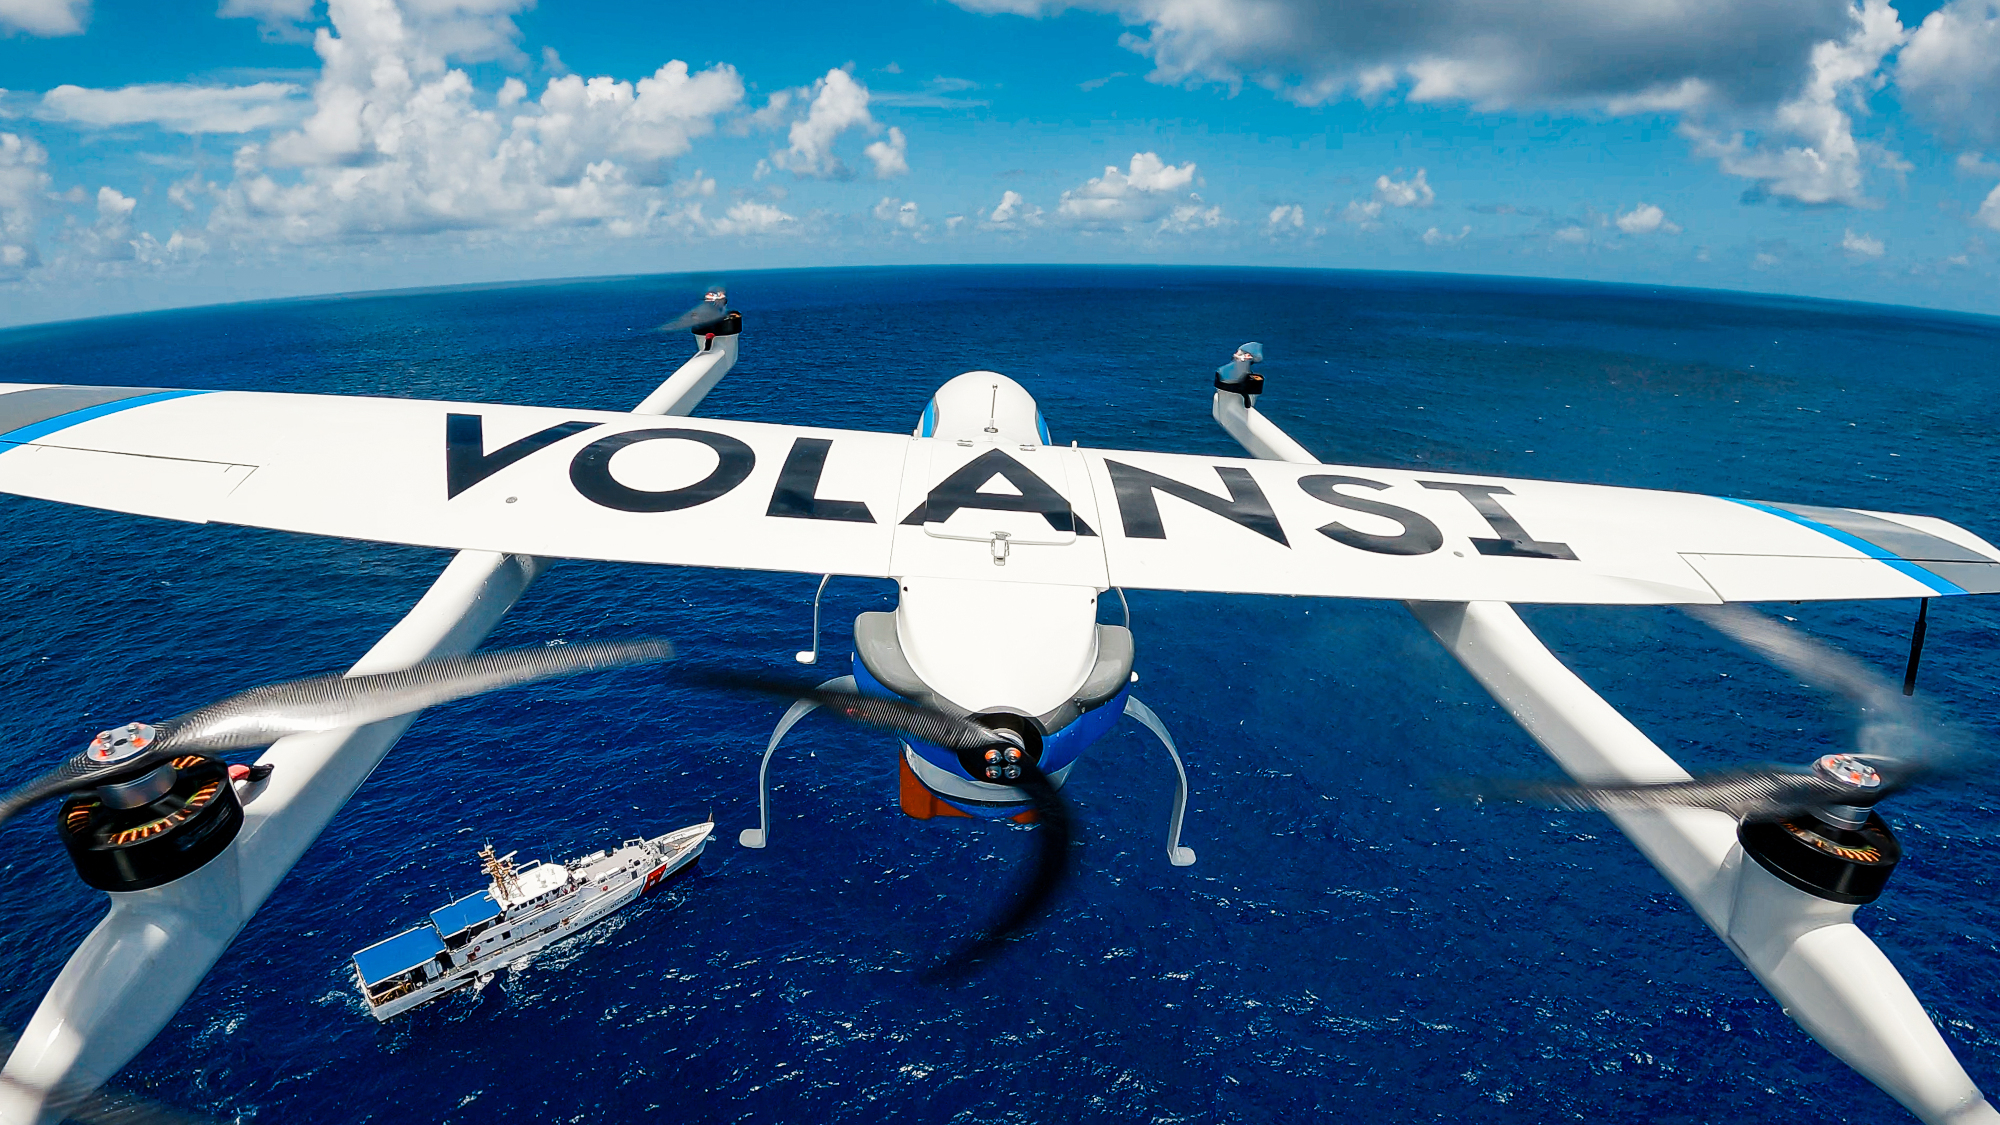 Drone Disruptors: Volansi's autonomous drone ecosystem can make deliveries just about anywhere with the click of a button